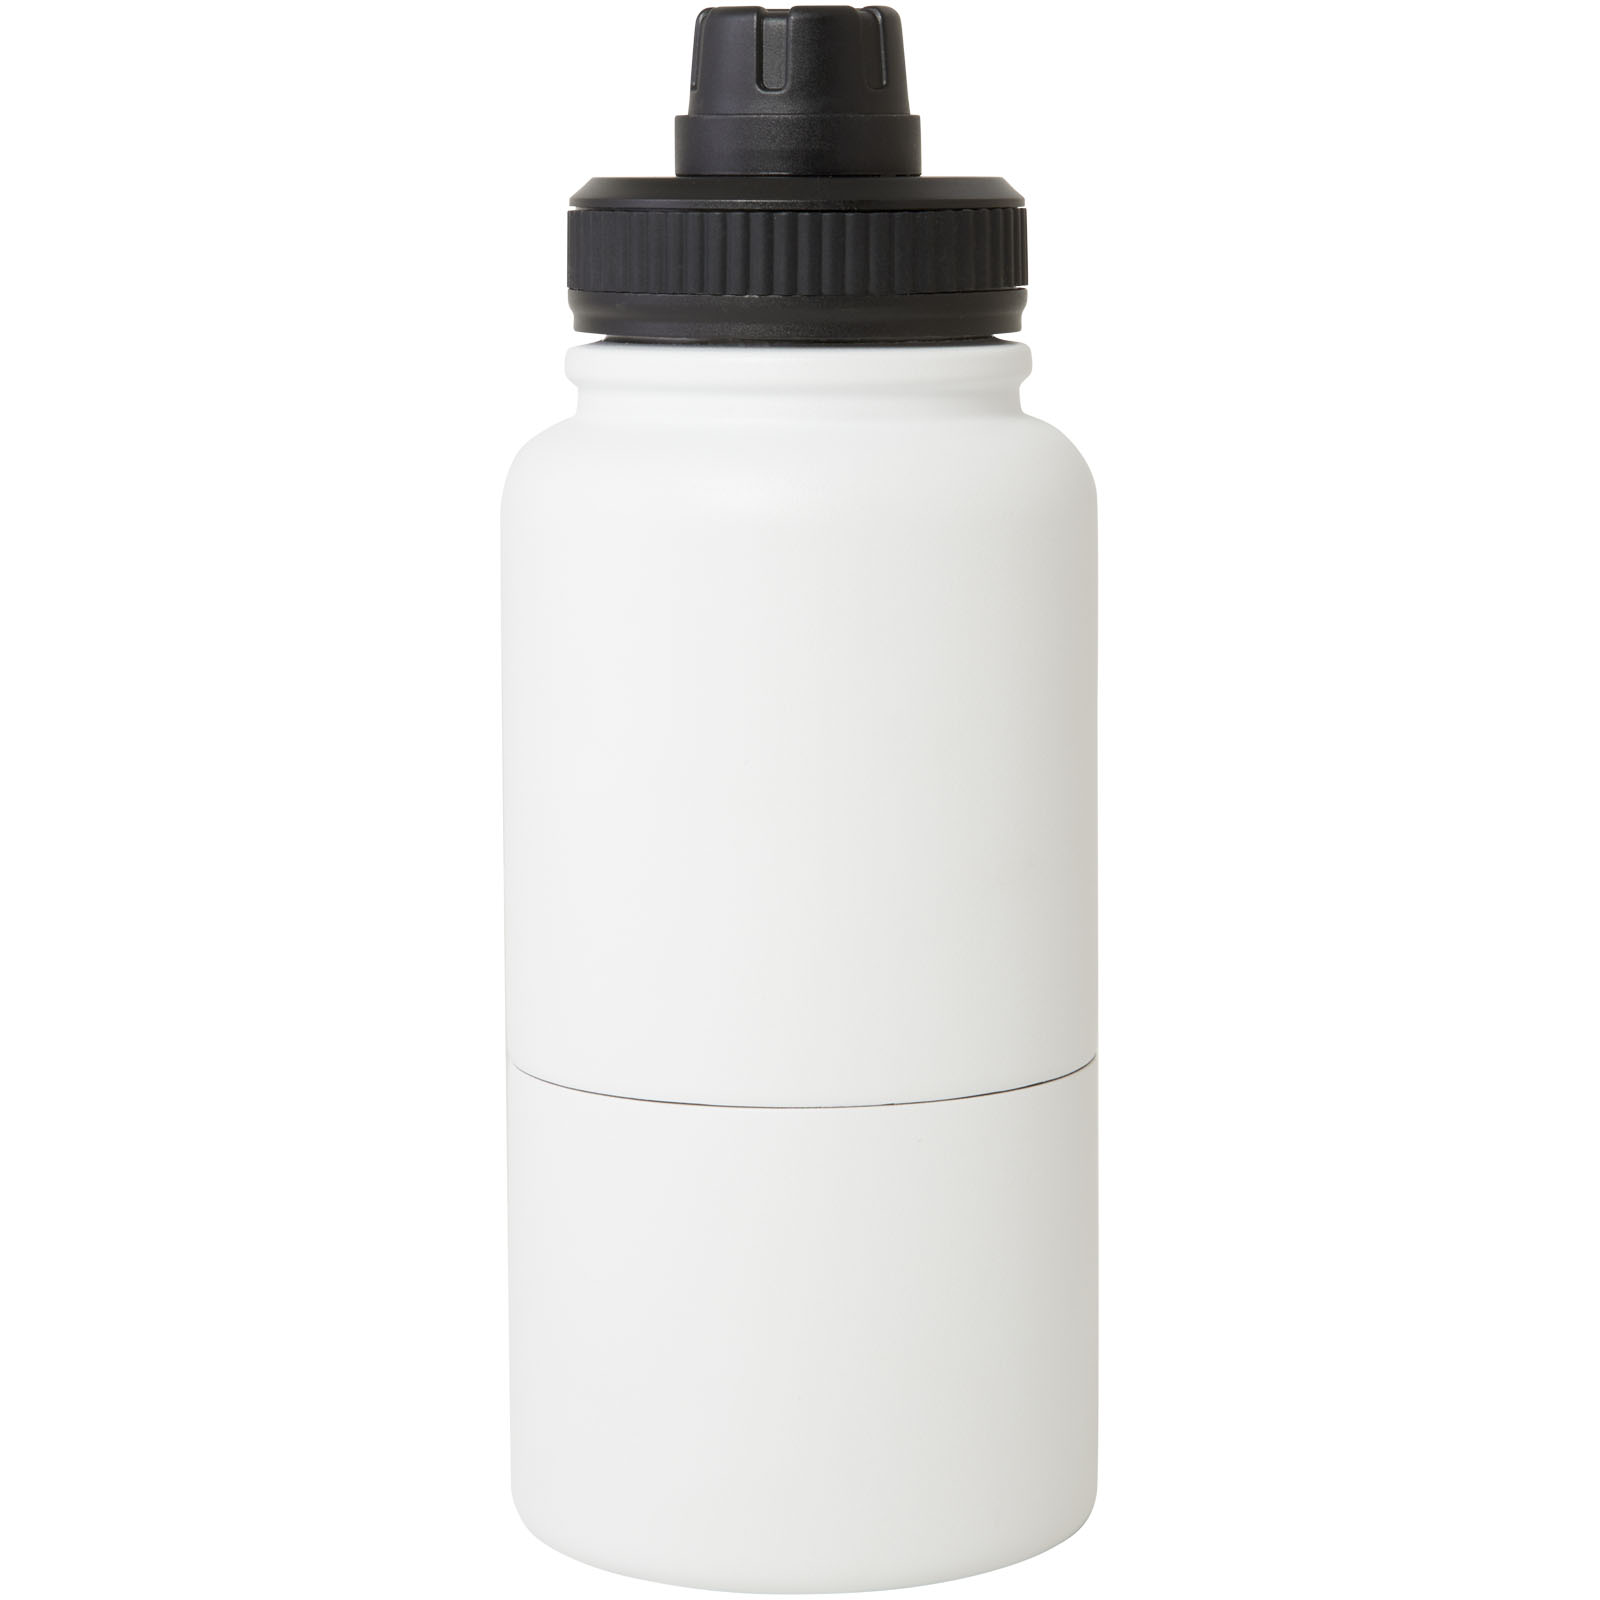 Advertising Insulated bottles - Dupeca 840 ml RCS certified stainless steel insulated sport bottle - 1